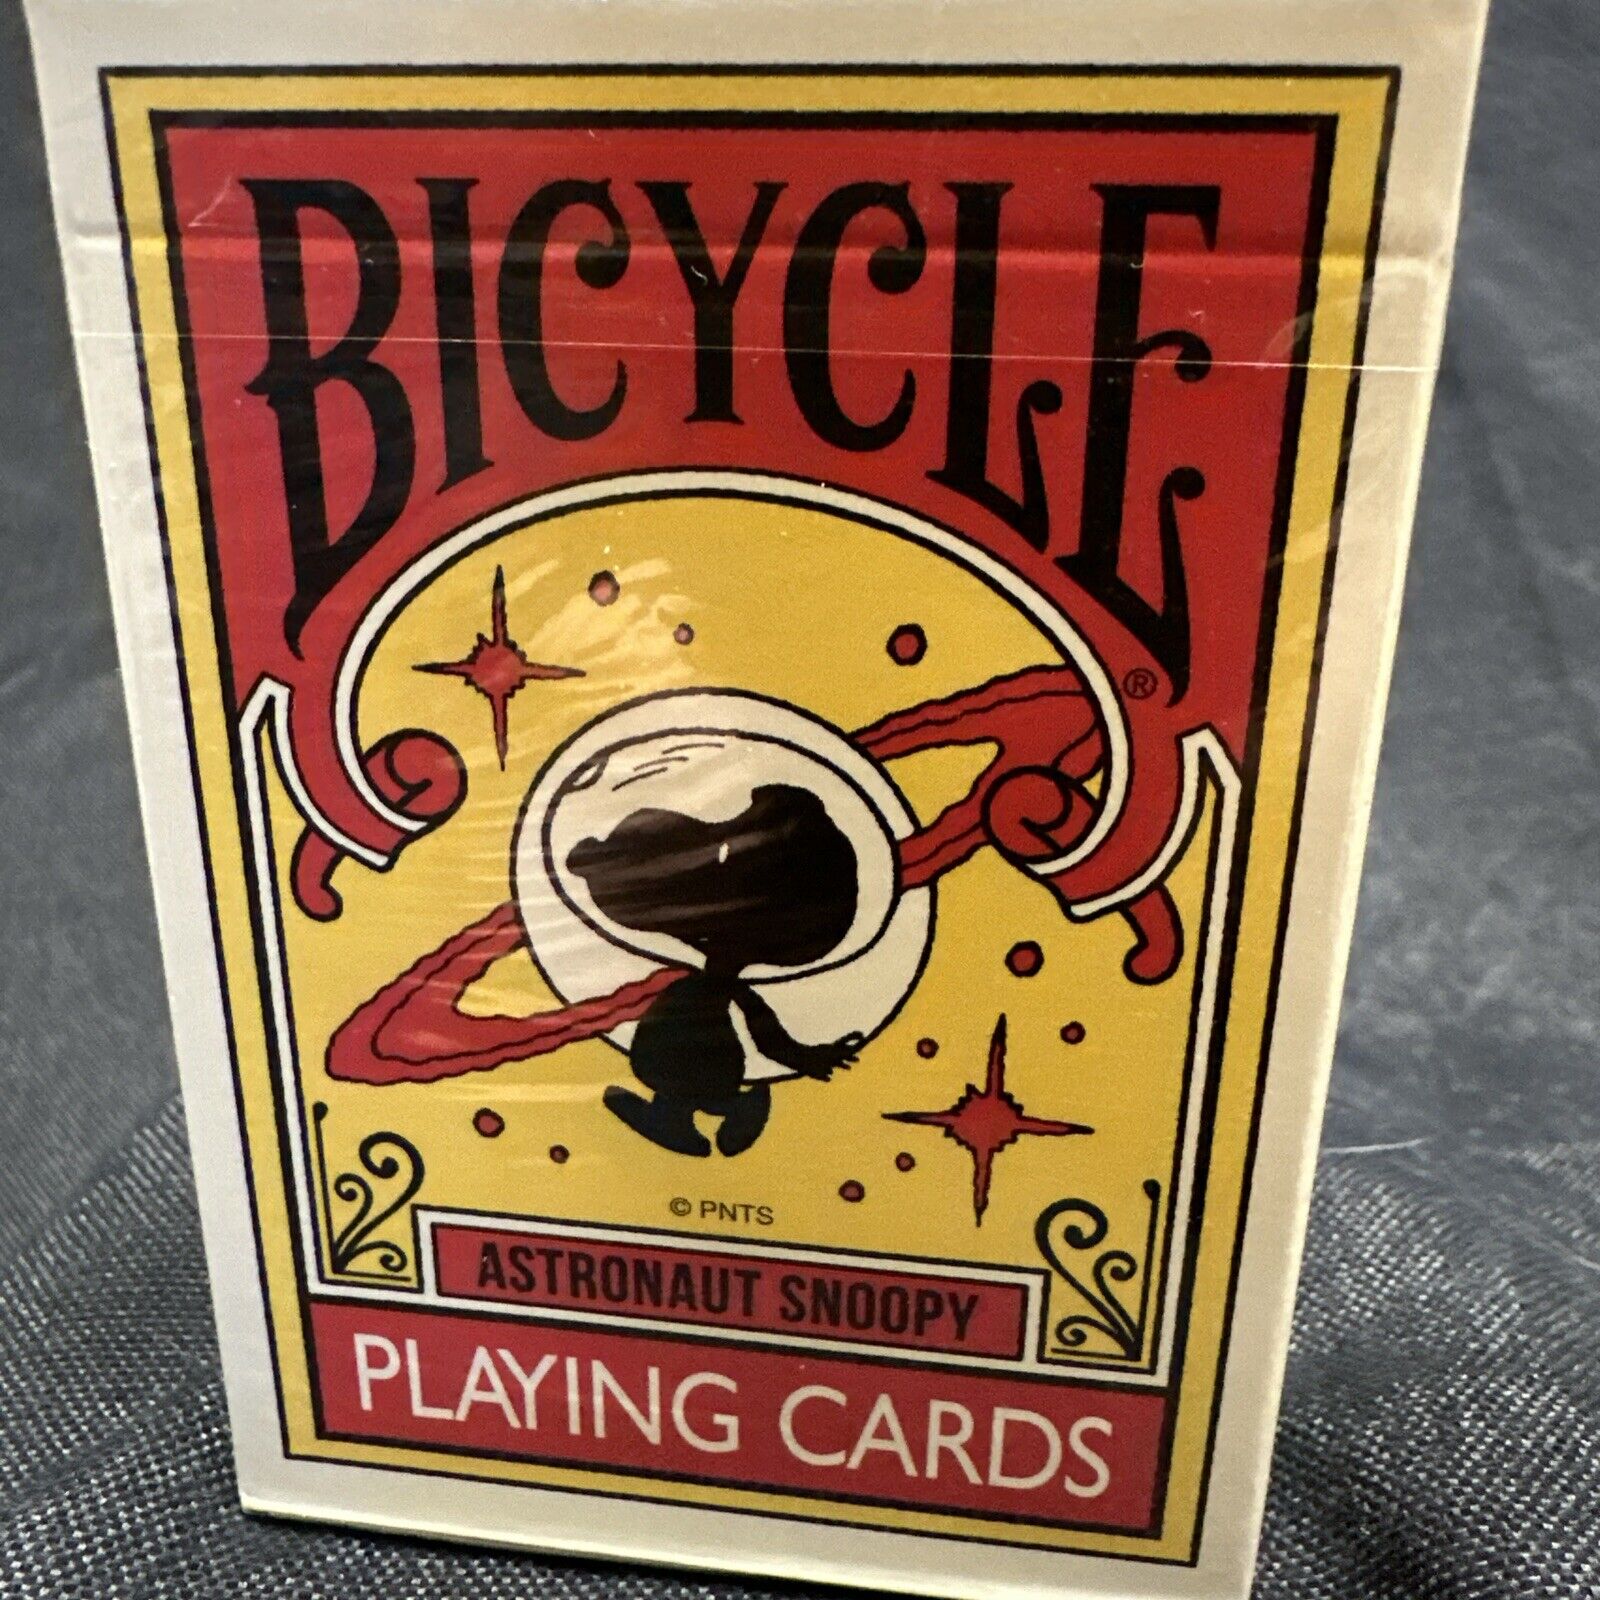 SEALED: Astronaut Snoopy Bicycle Playing Cards Medicom Toy Japan Export